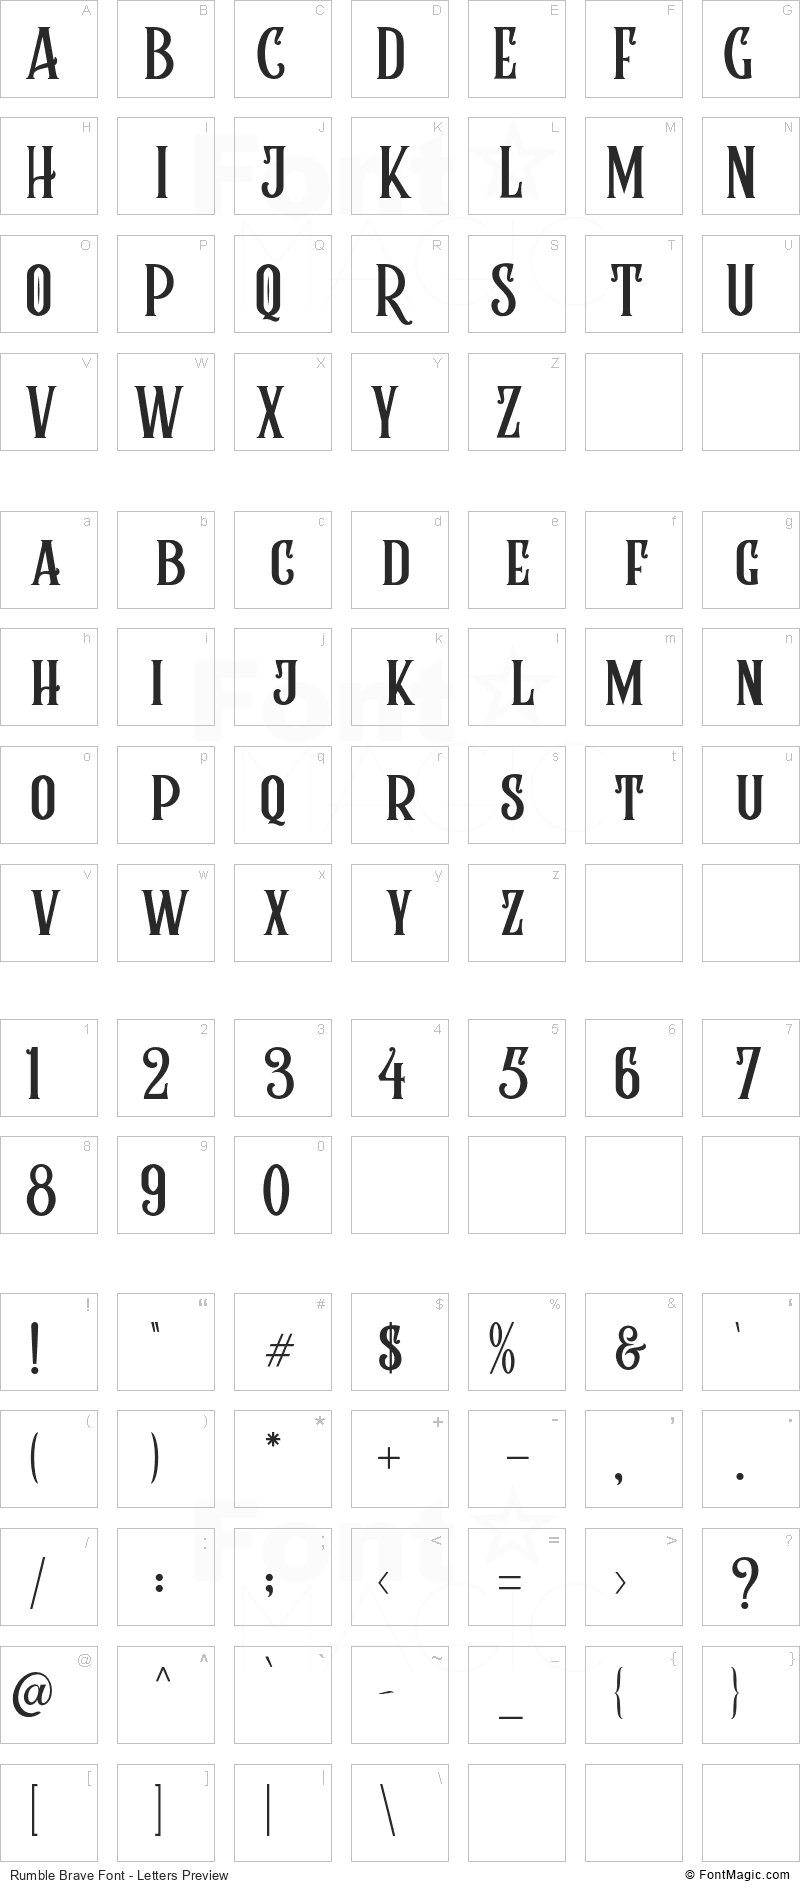 Rumble Brave Font - All Latters Preview Chart